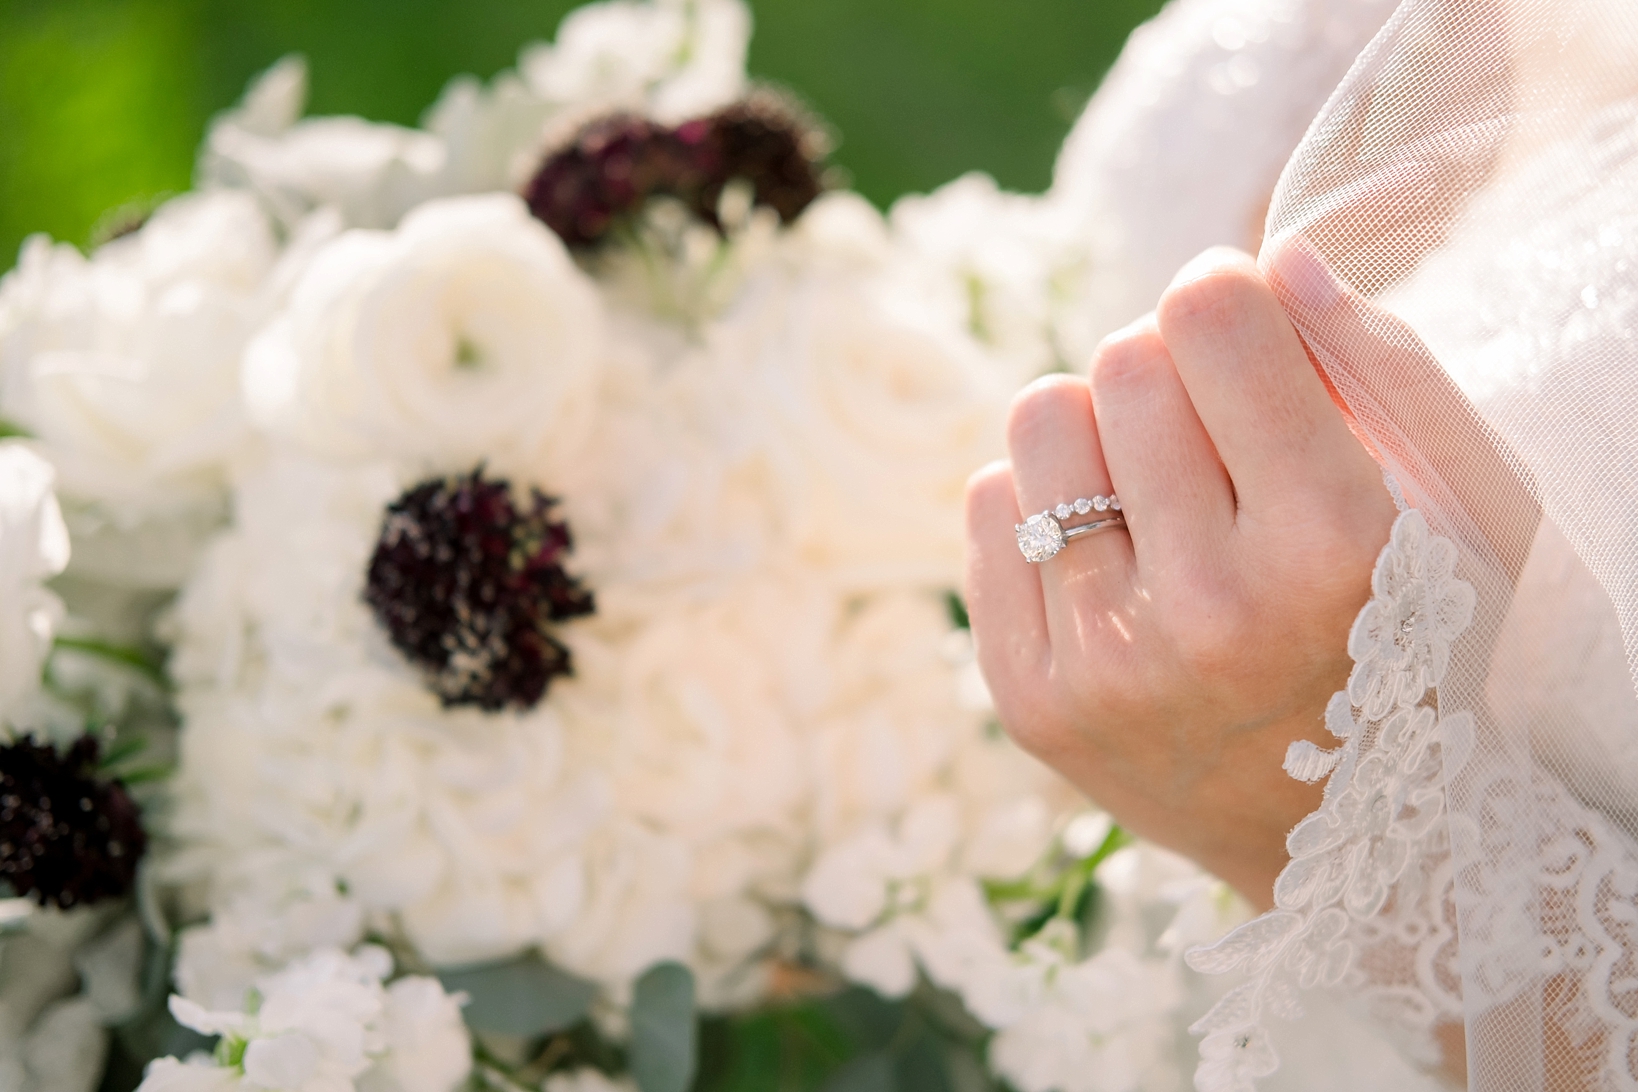 The bride's wedding ring glints in the sun surrounded by the lace of her sleeves by Sarah & Ben Photography